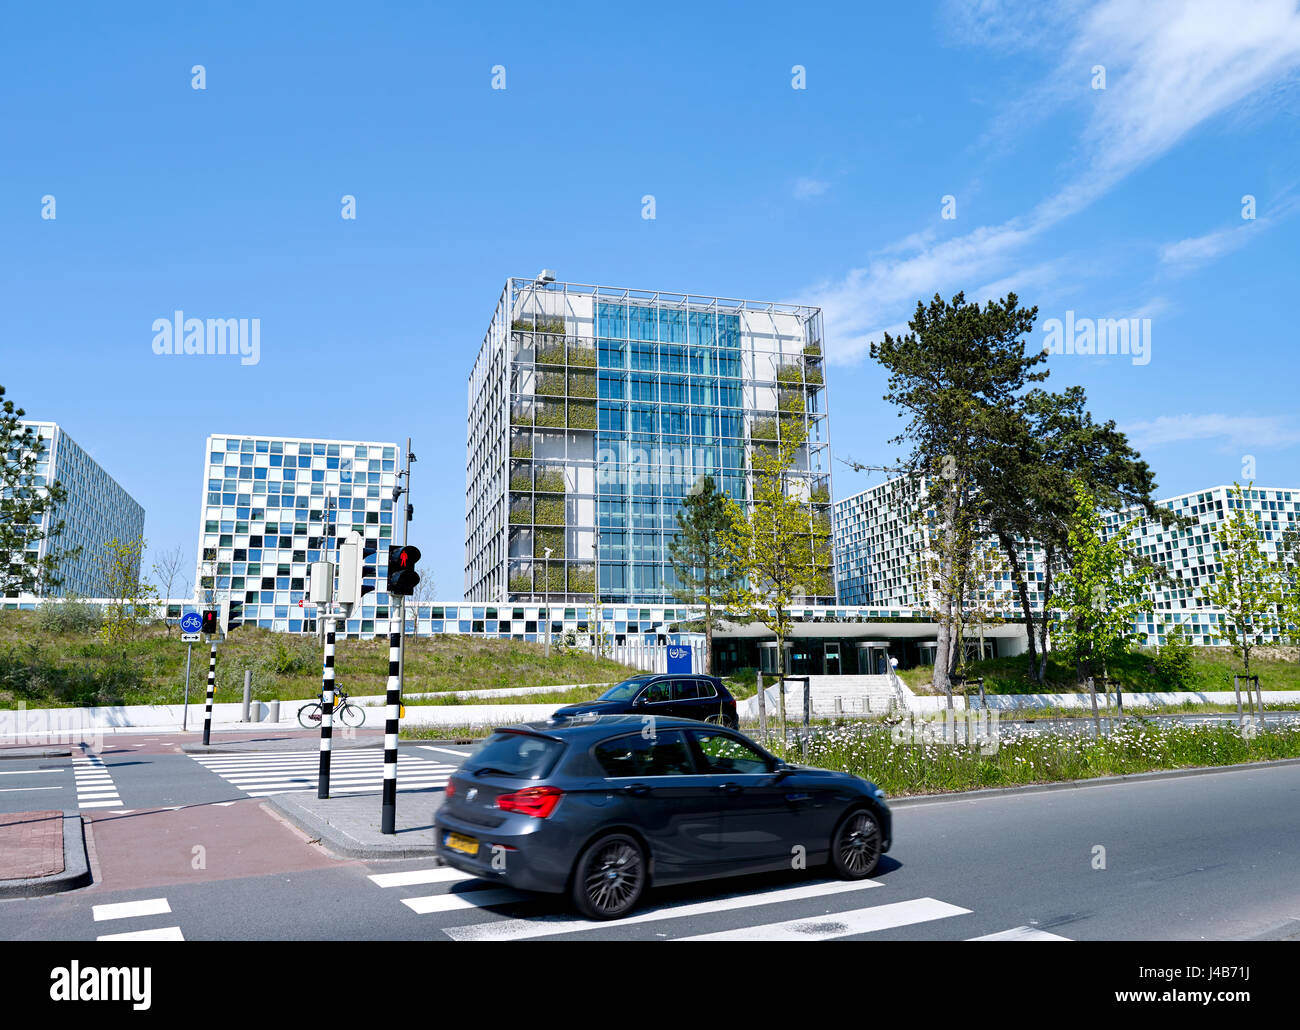 The International Criminal Court (ICC or ICCt) , intergovernmental organization and international tribunal,  in The Hague Stock Photo